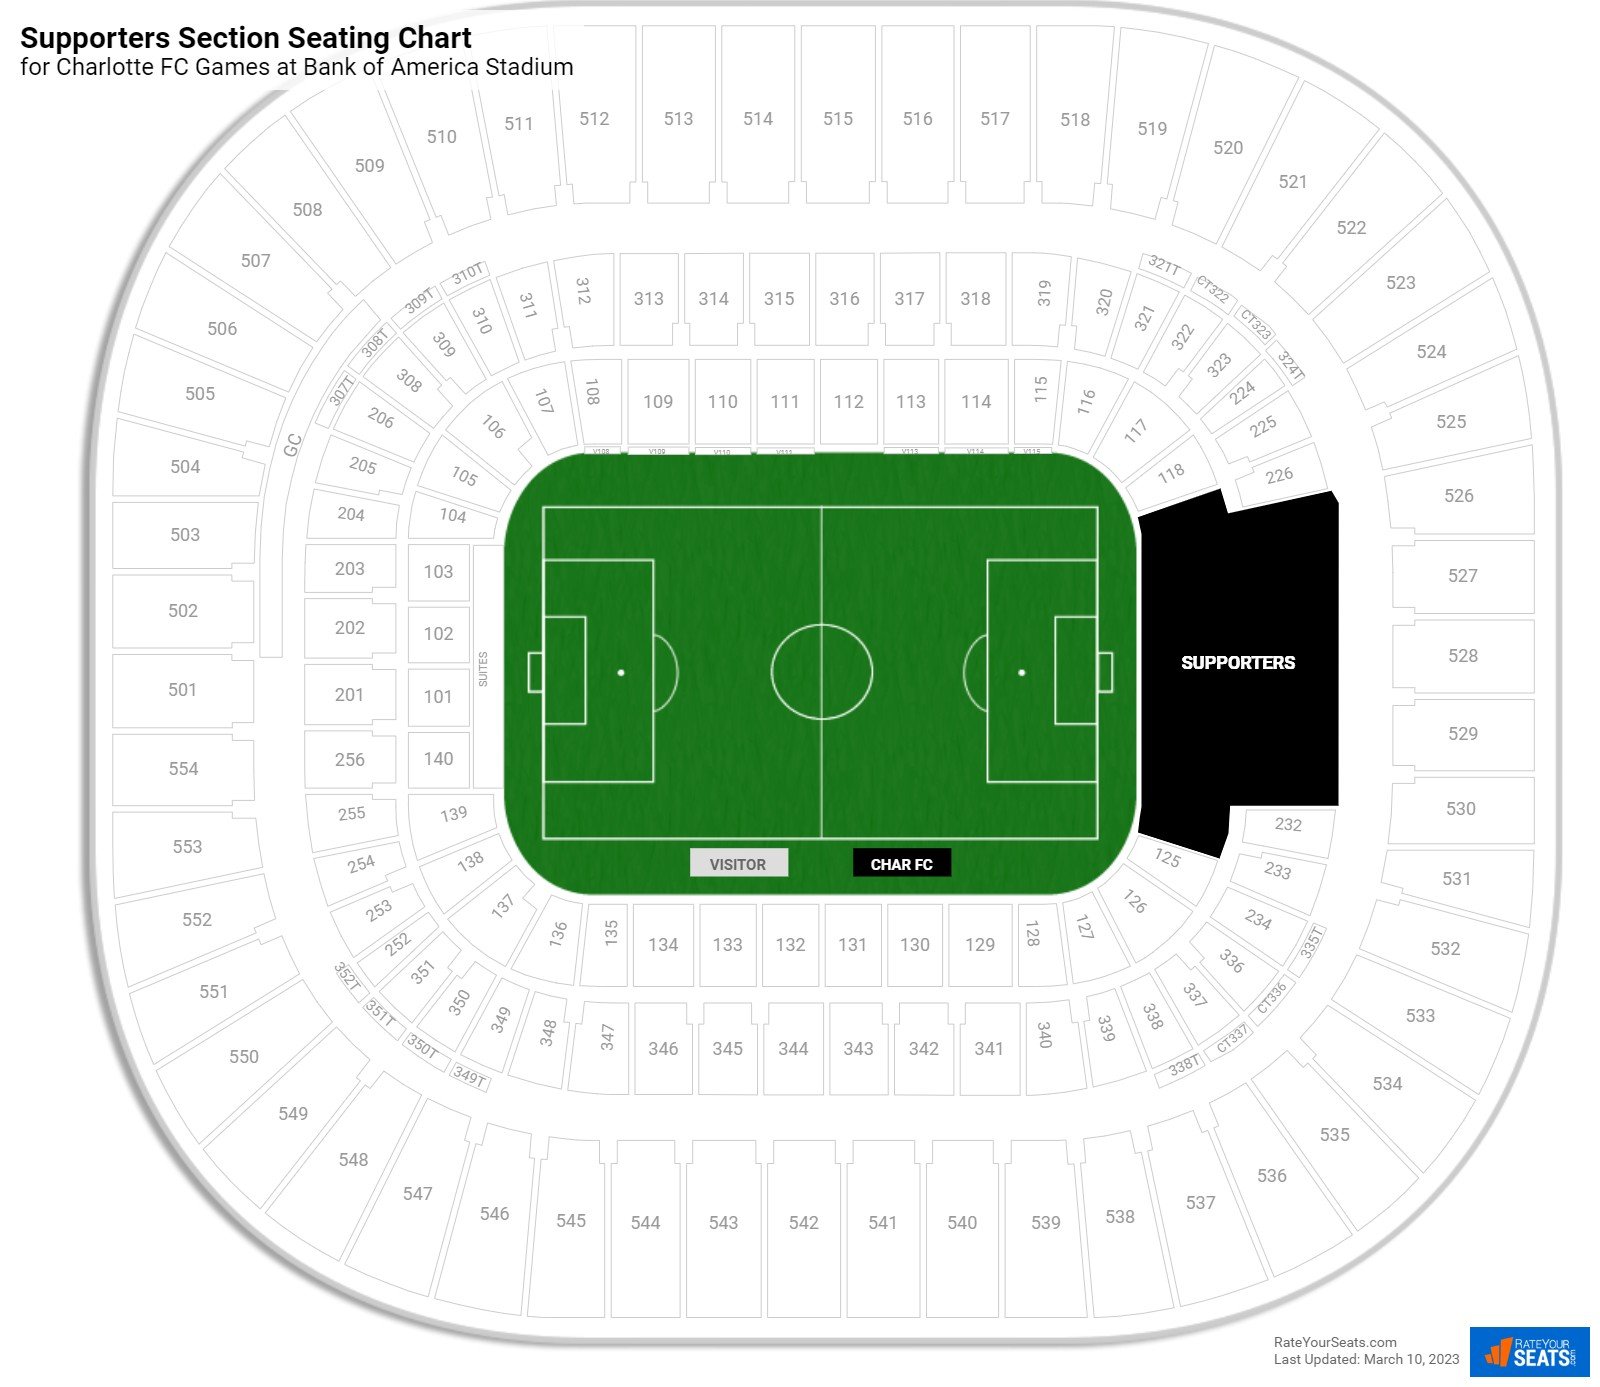 Charlotte FC Supporters Section Seating Chart at Bank of America Stadium